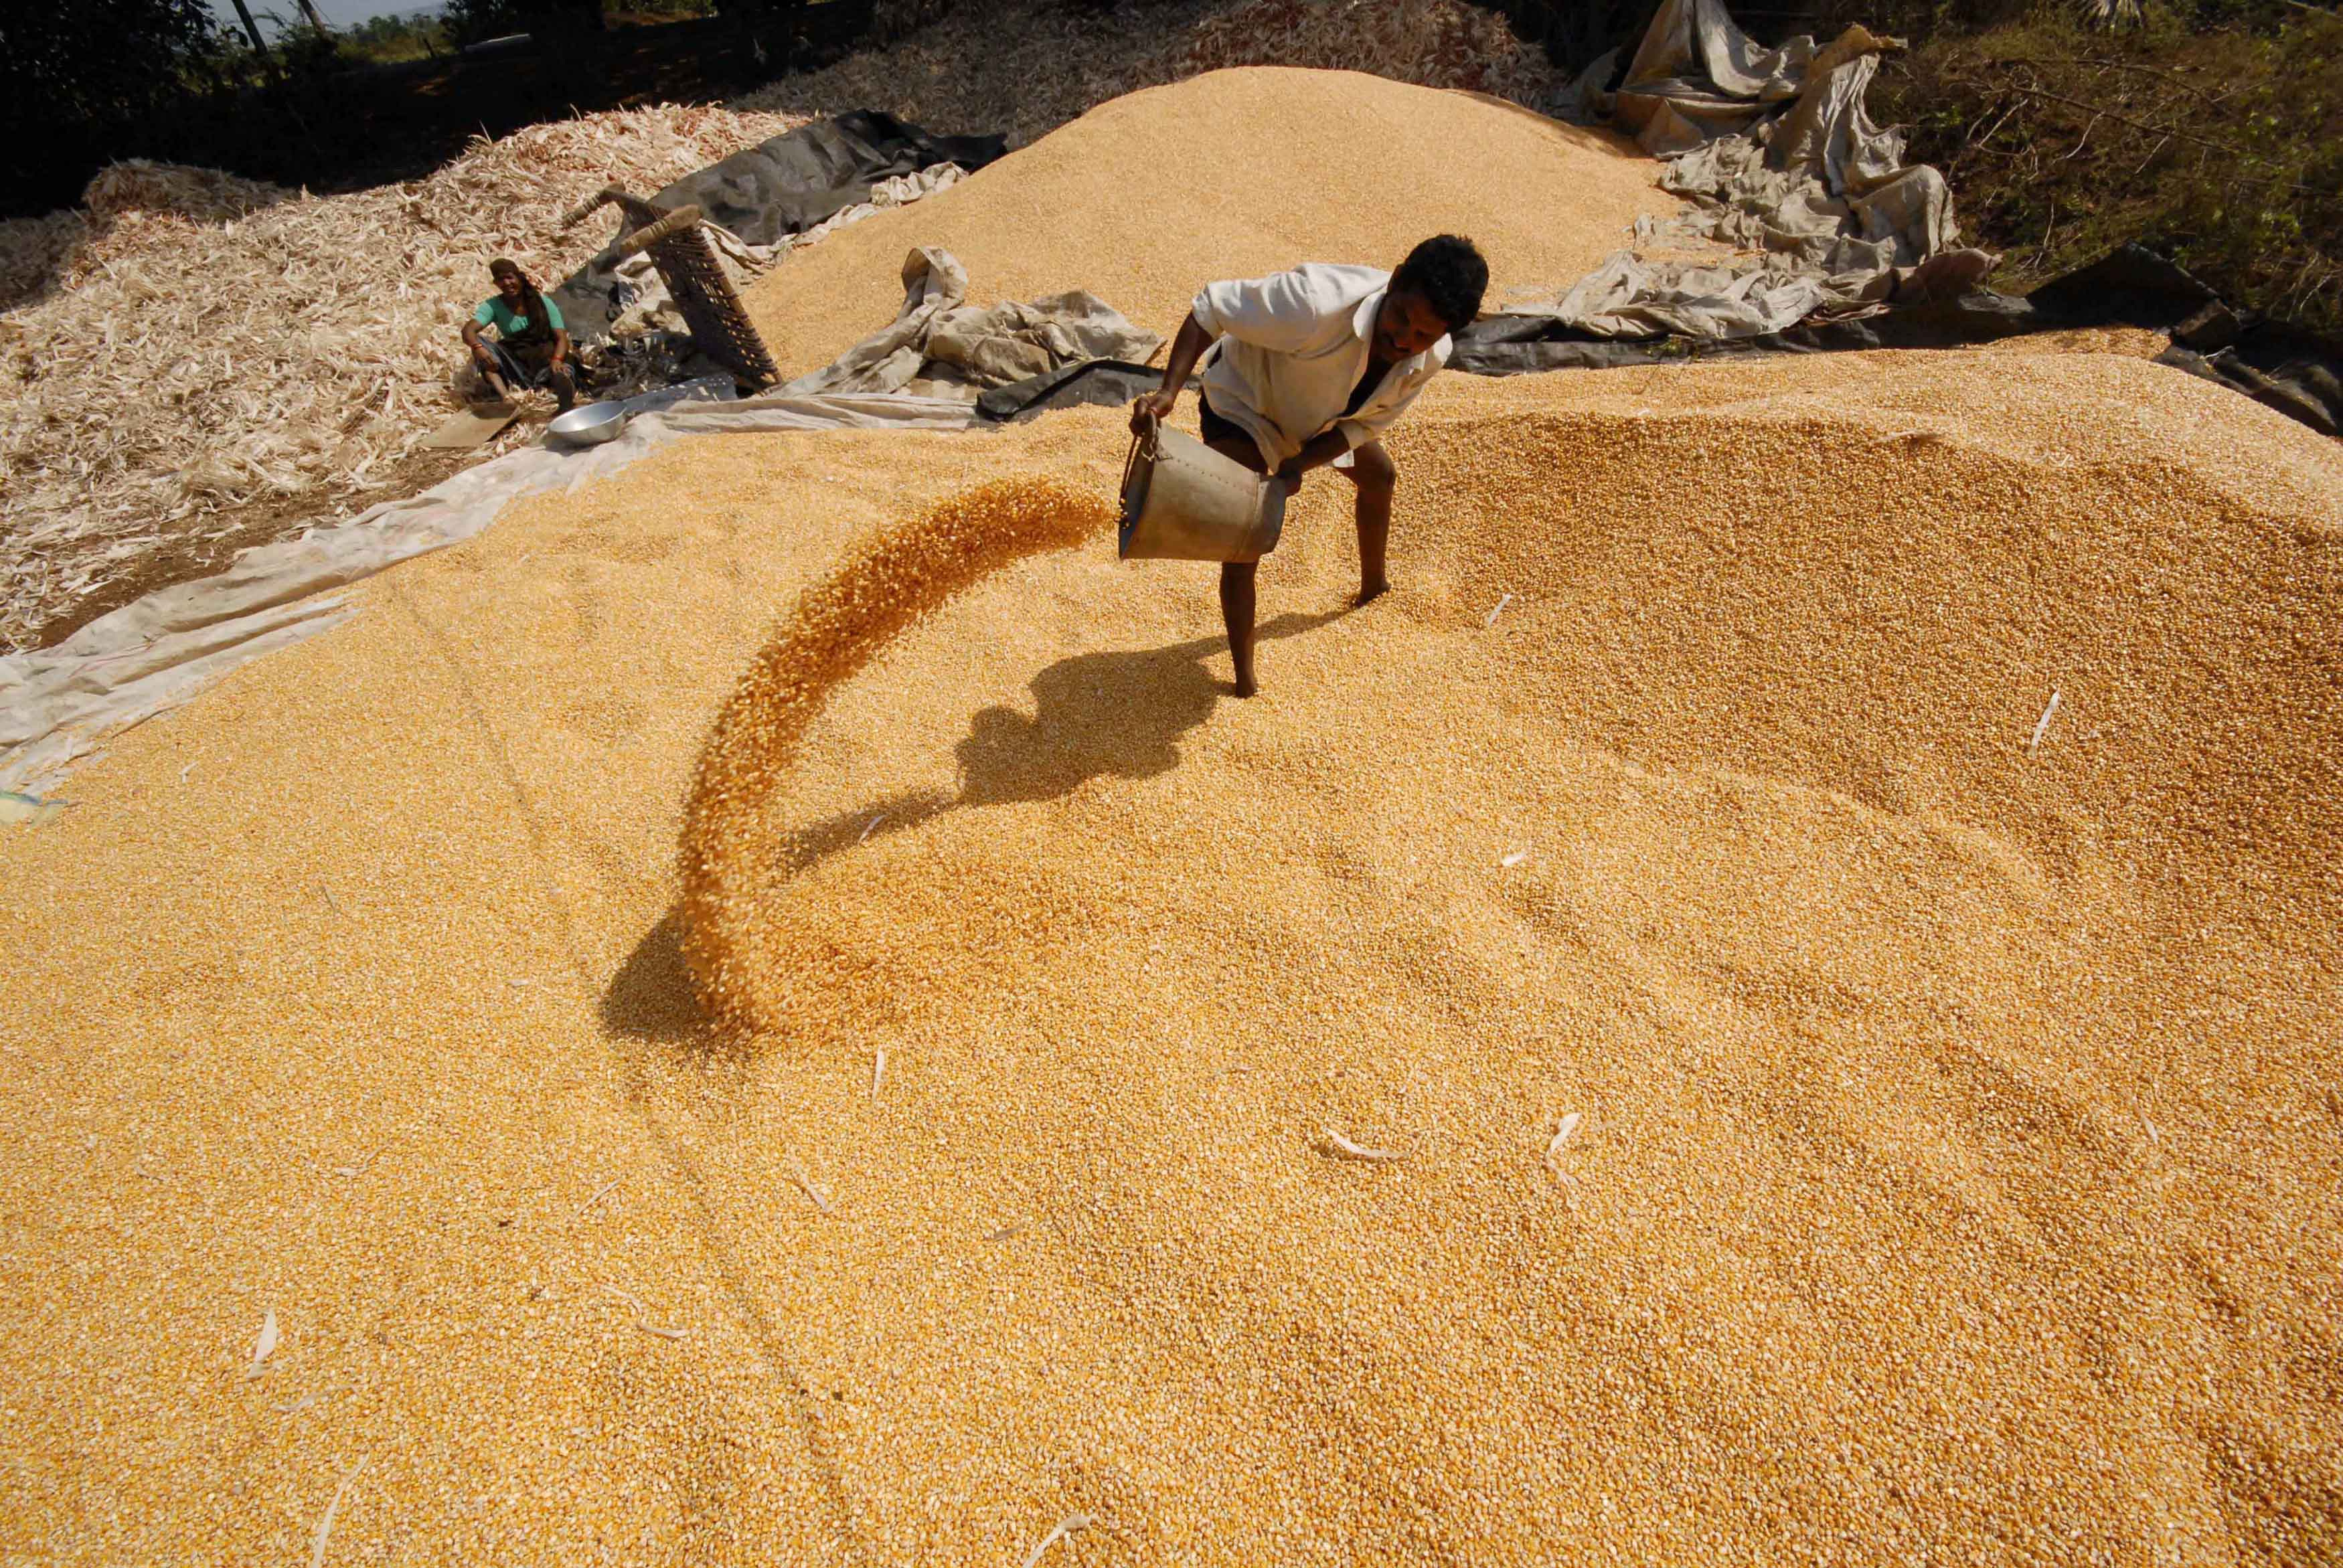 A labourer shuffles grains of corn to dry on outskirts of Hyderabad